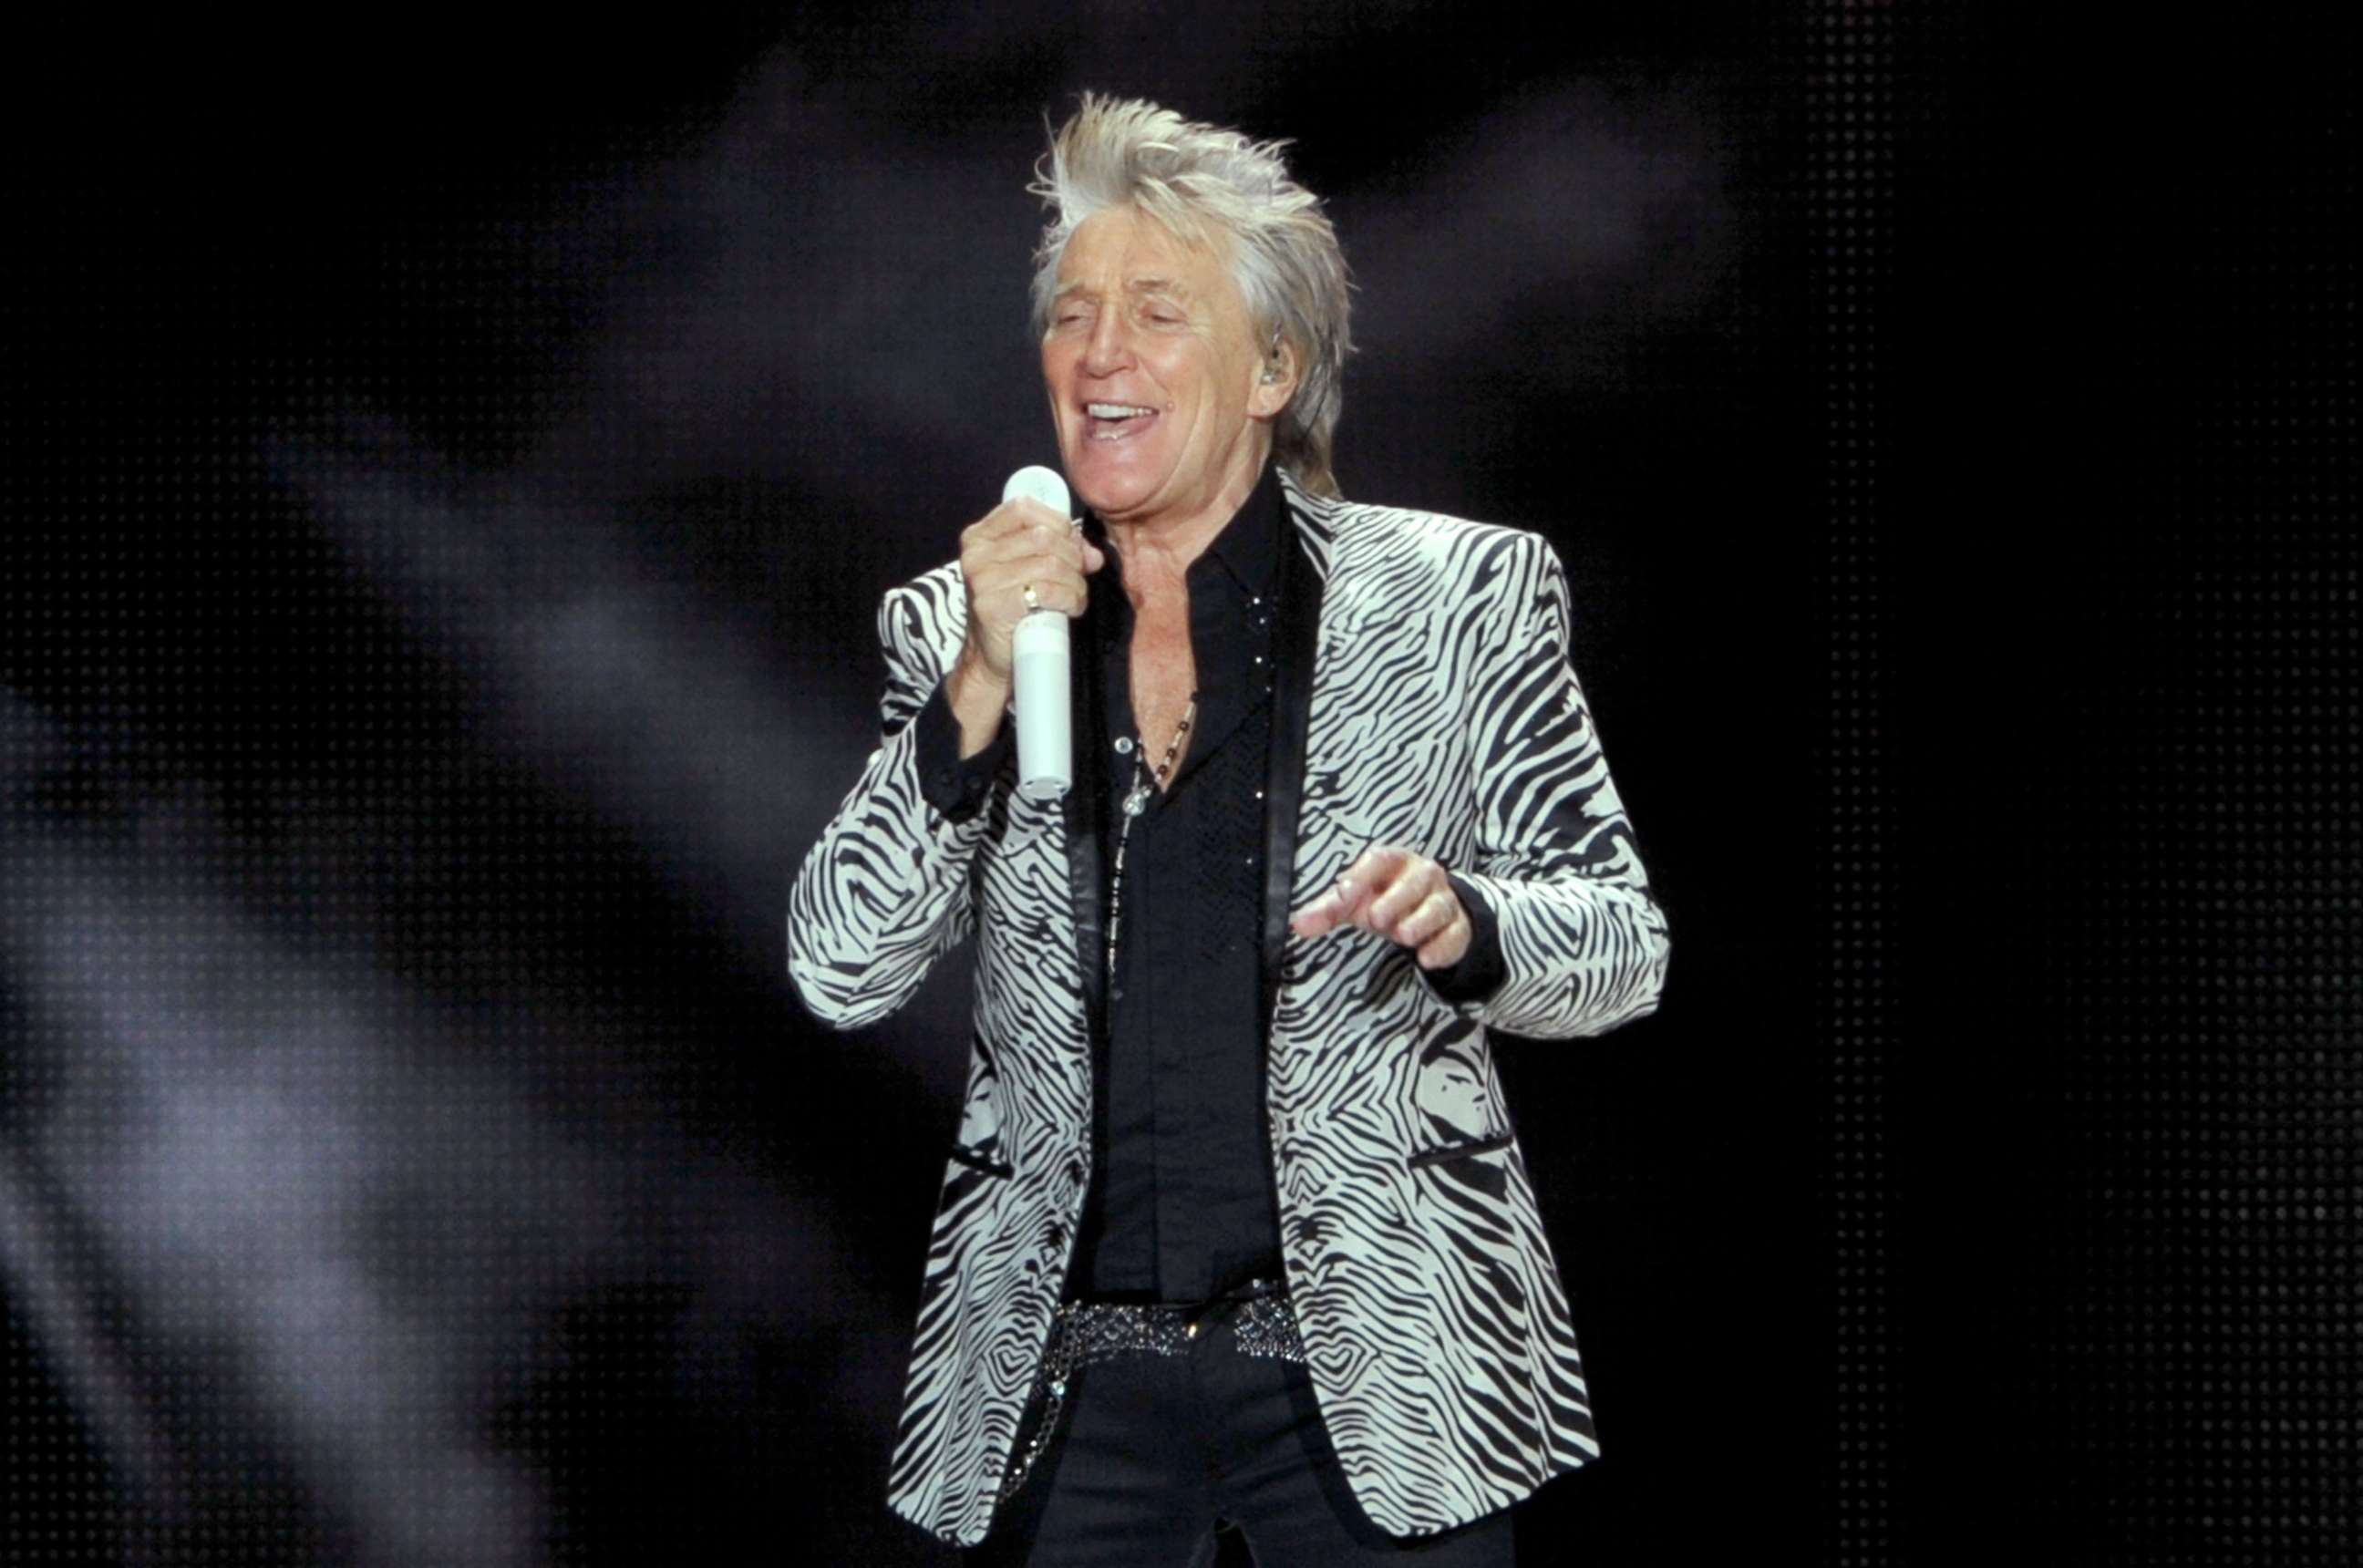 PHOTO: Rod Stewart performs at the Forum di Assago in Milan, Italy, Jan. 31, 2018.